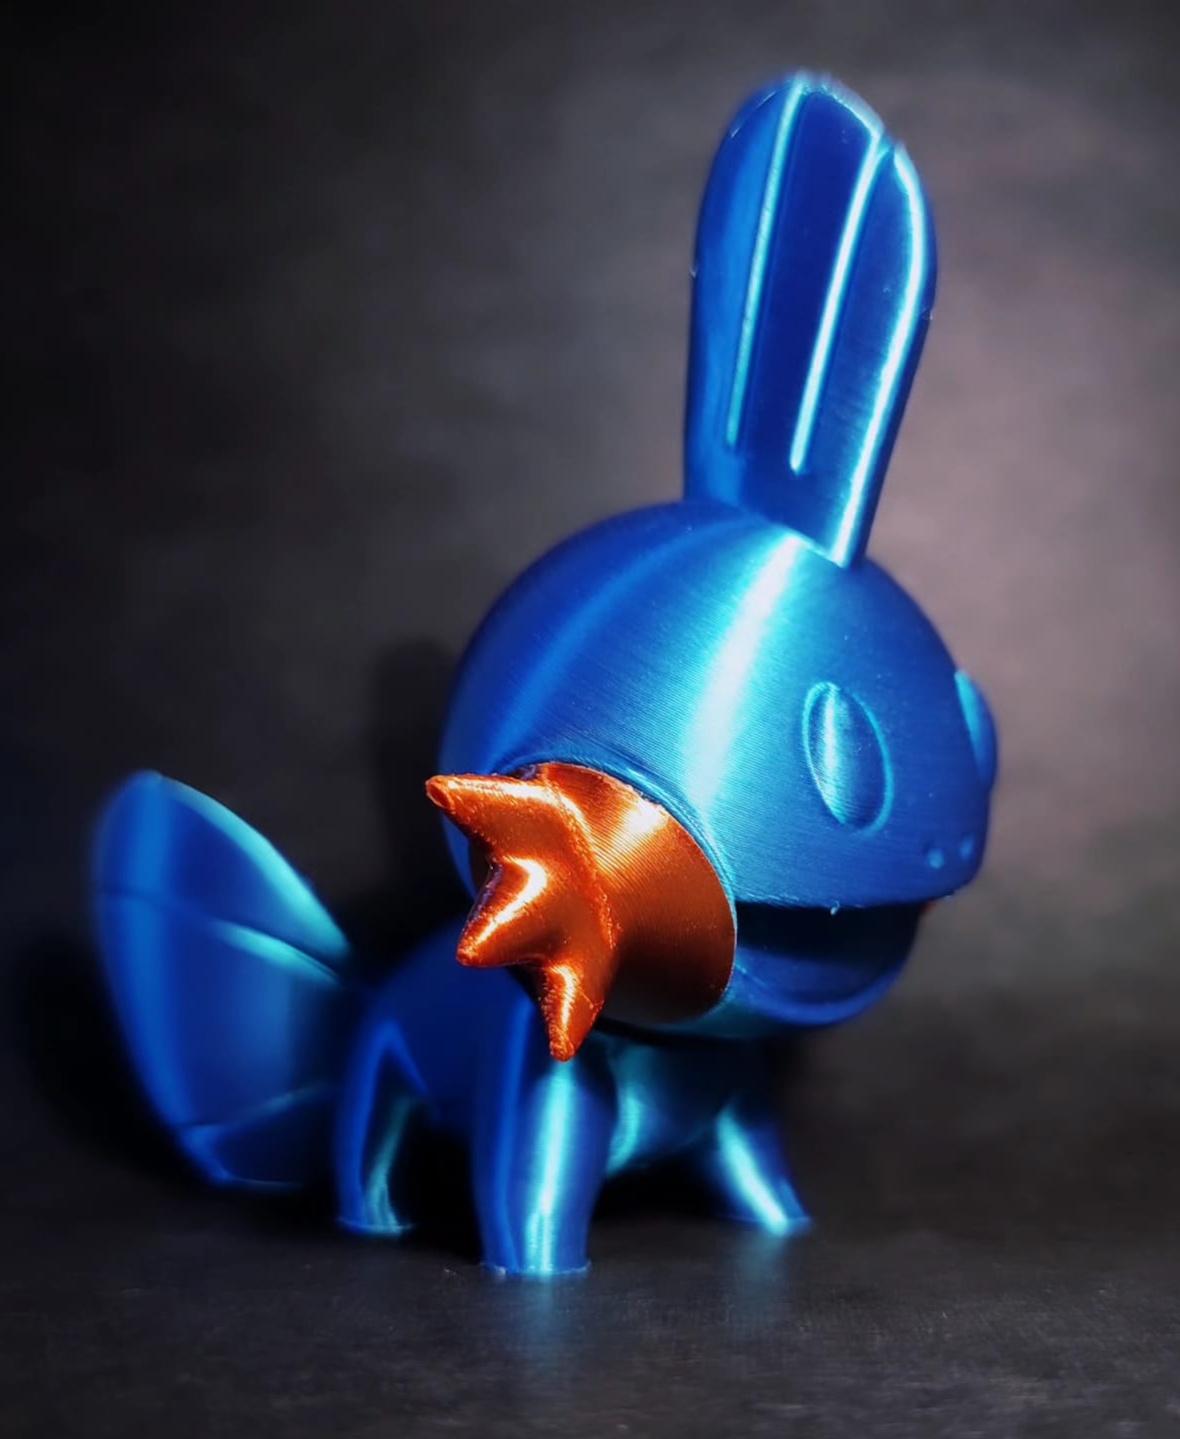 Mudkip - Pokemon - Fan Art - Prints Awesome !
Check my insta page @3Doodling for more makes! ;) - 3d model